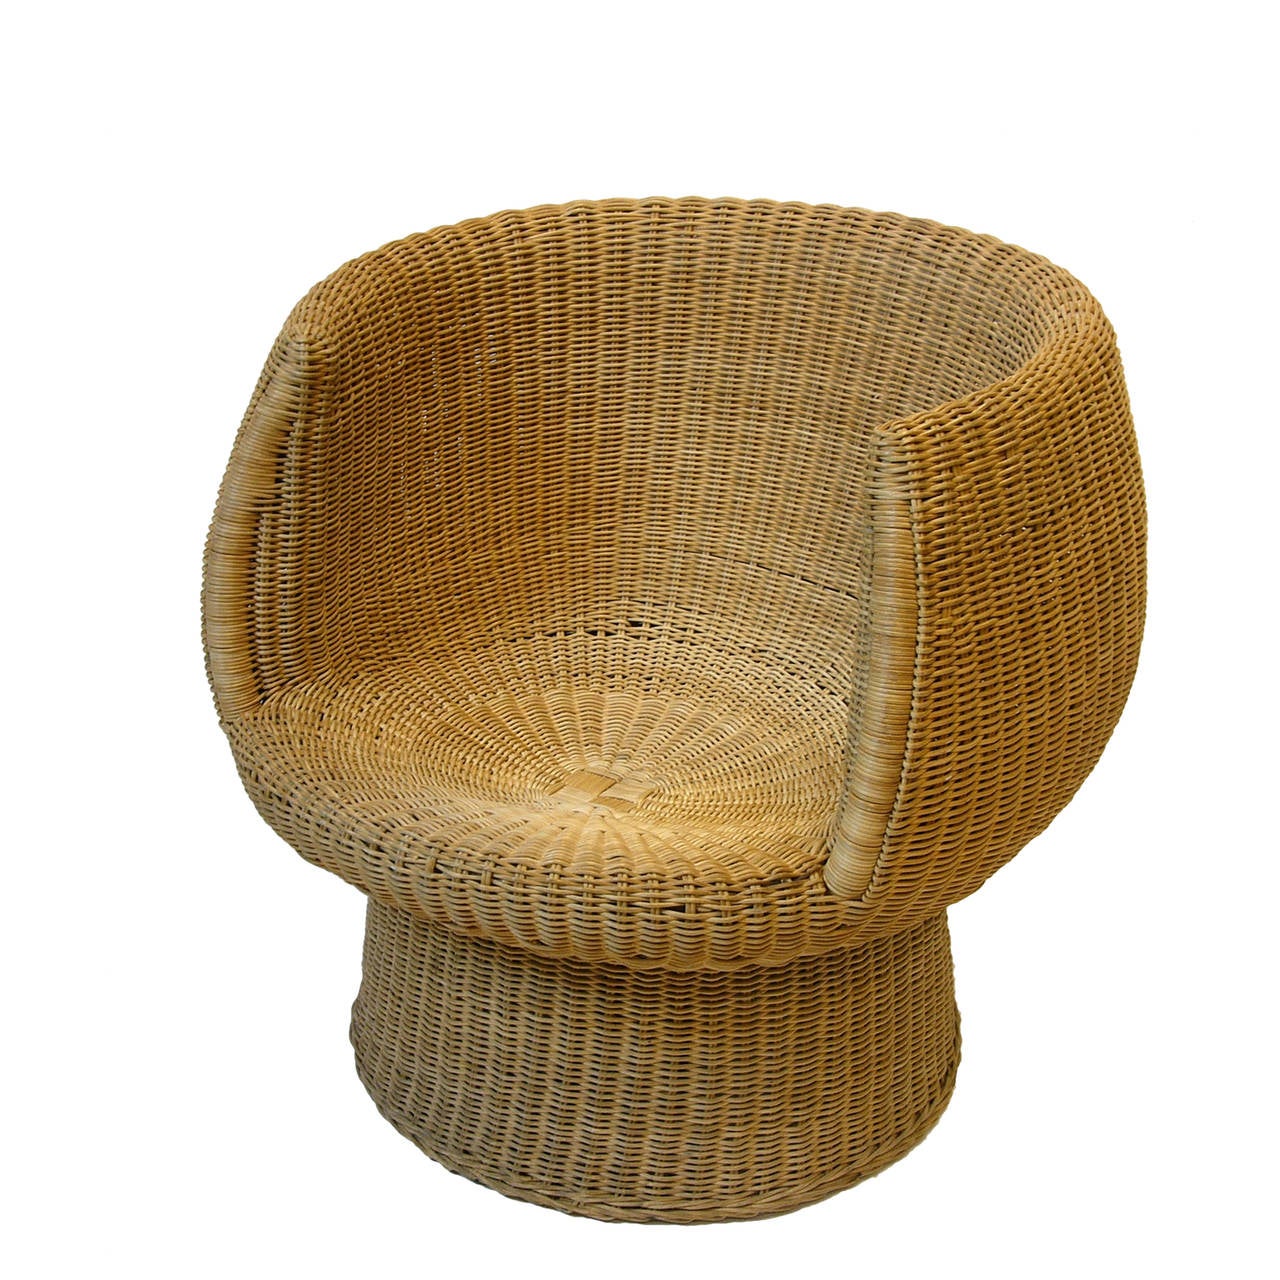 Excellent cane chair from the 1960s in the manner of Eero Aarnio. Maker unknown.